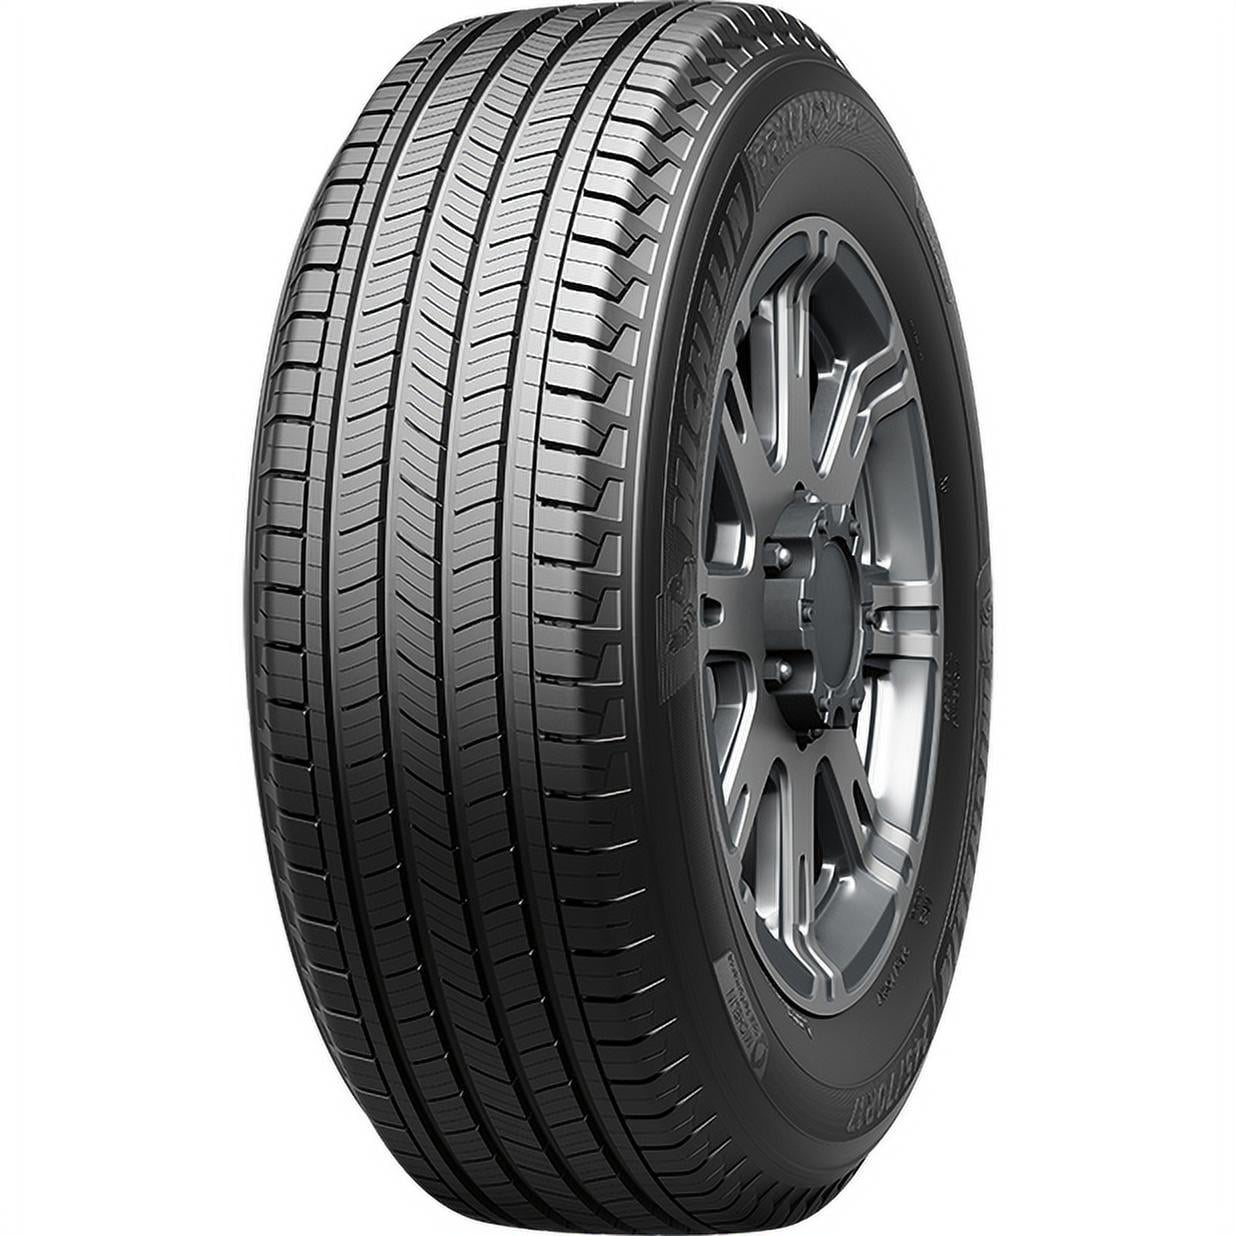 245/50R20 102V MICHELIN Primacy Tour A/S Sport and Performance Cars All-Season Car Tire 